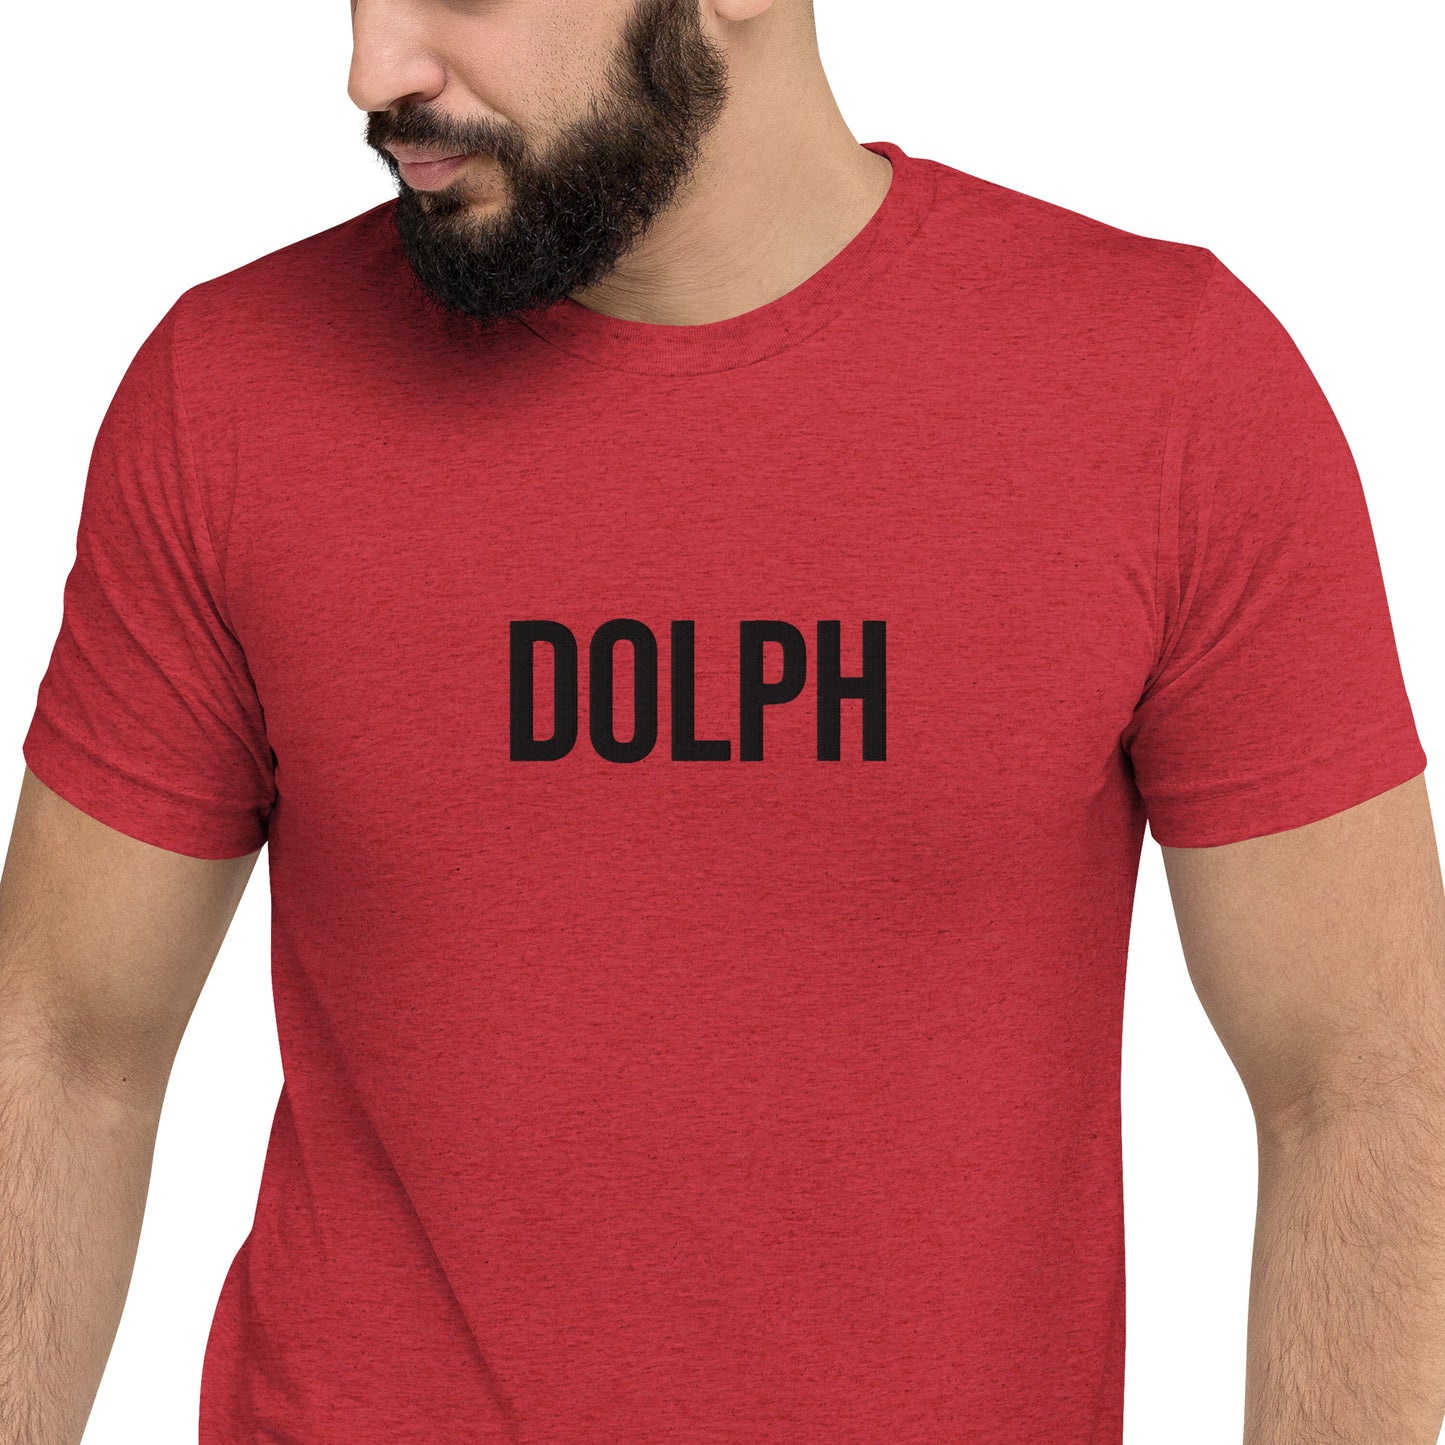 Dolph Embroidered Unisex T-Shirt